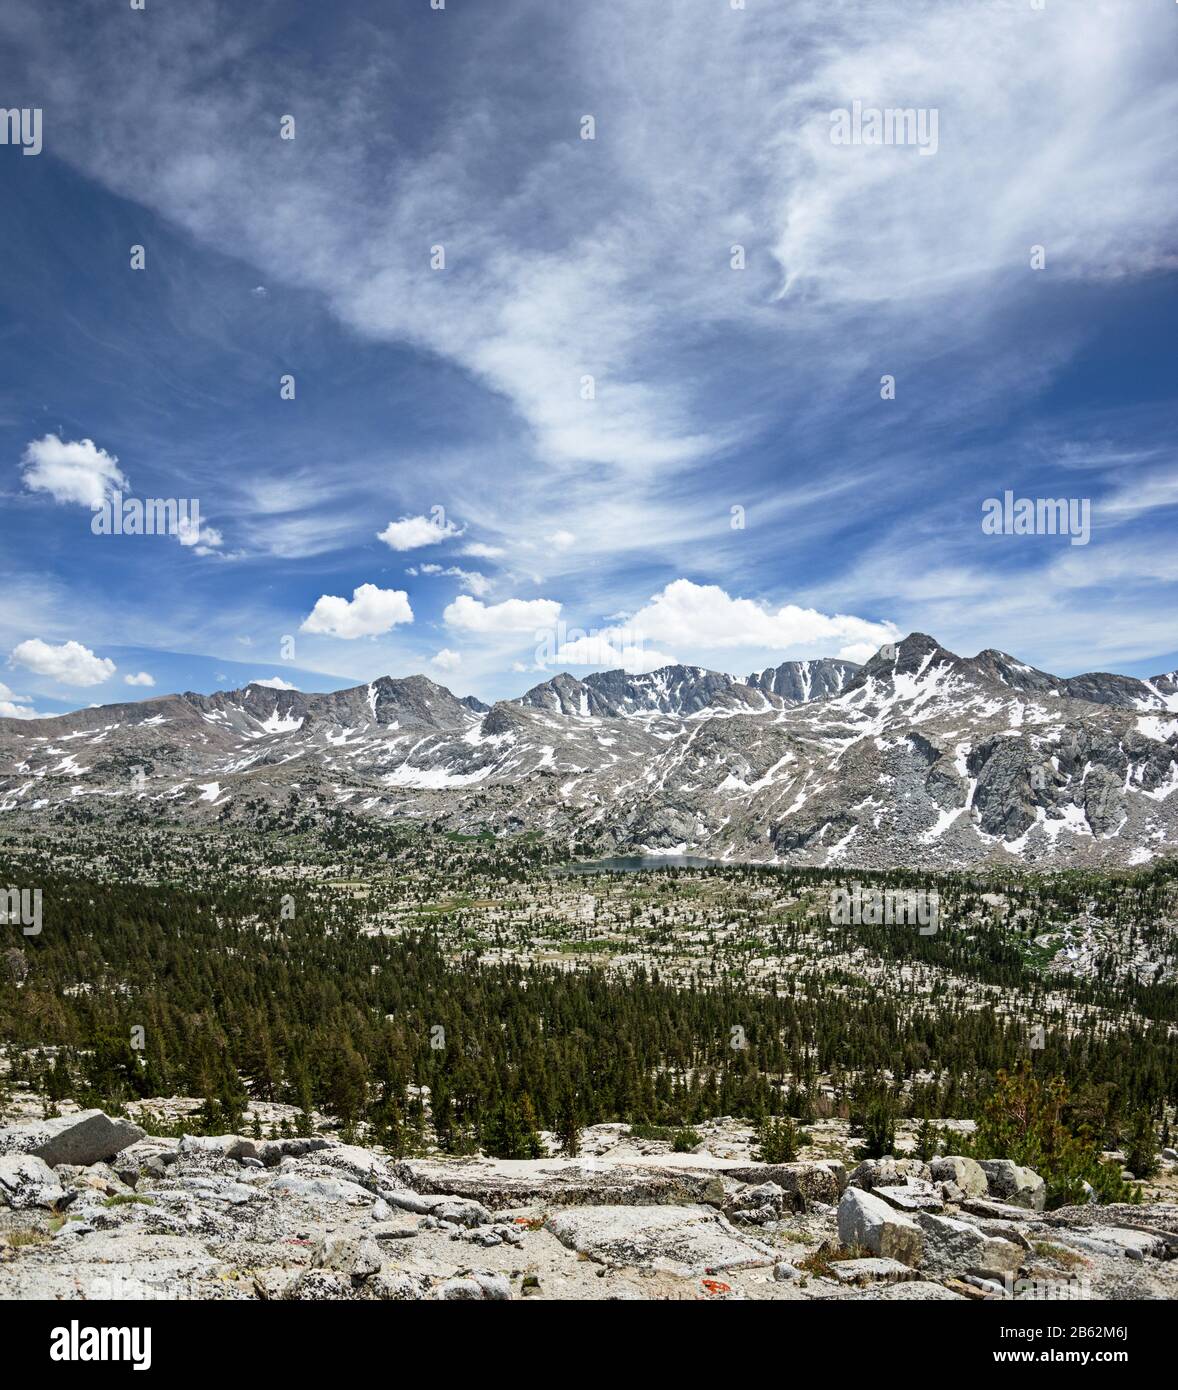 landscape view of Glacier Divide from Humphreys Basin in the Sierra Nevada Mountains with clouds in the sky Stock Photo